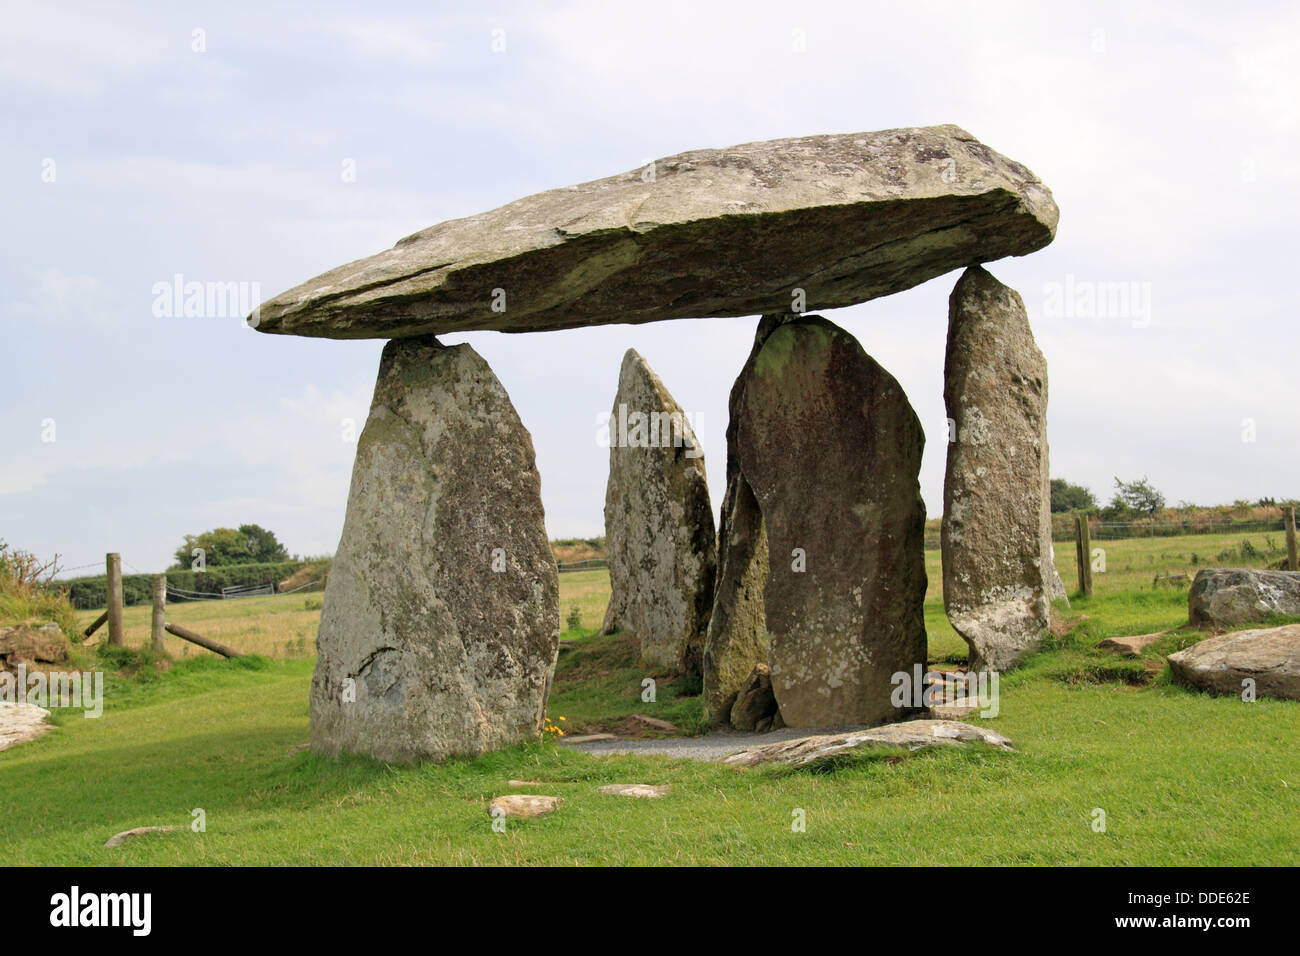 Pentre Ifan neolithic burial chamber, Nevern, Pembrokeshire, Wales, Great Britain, United Kingdom, UK, Europe Stock Photo